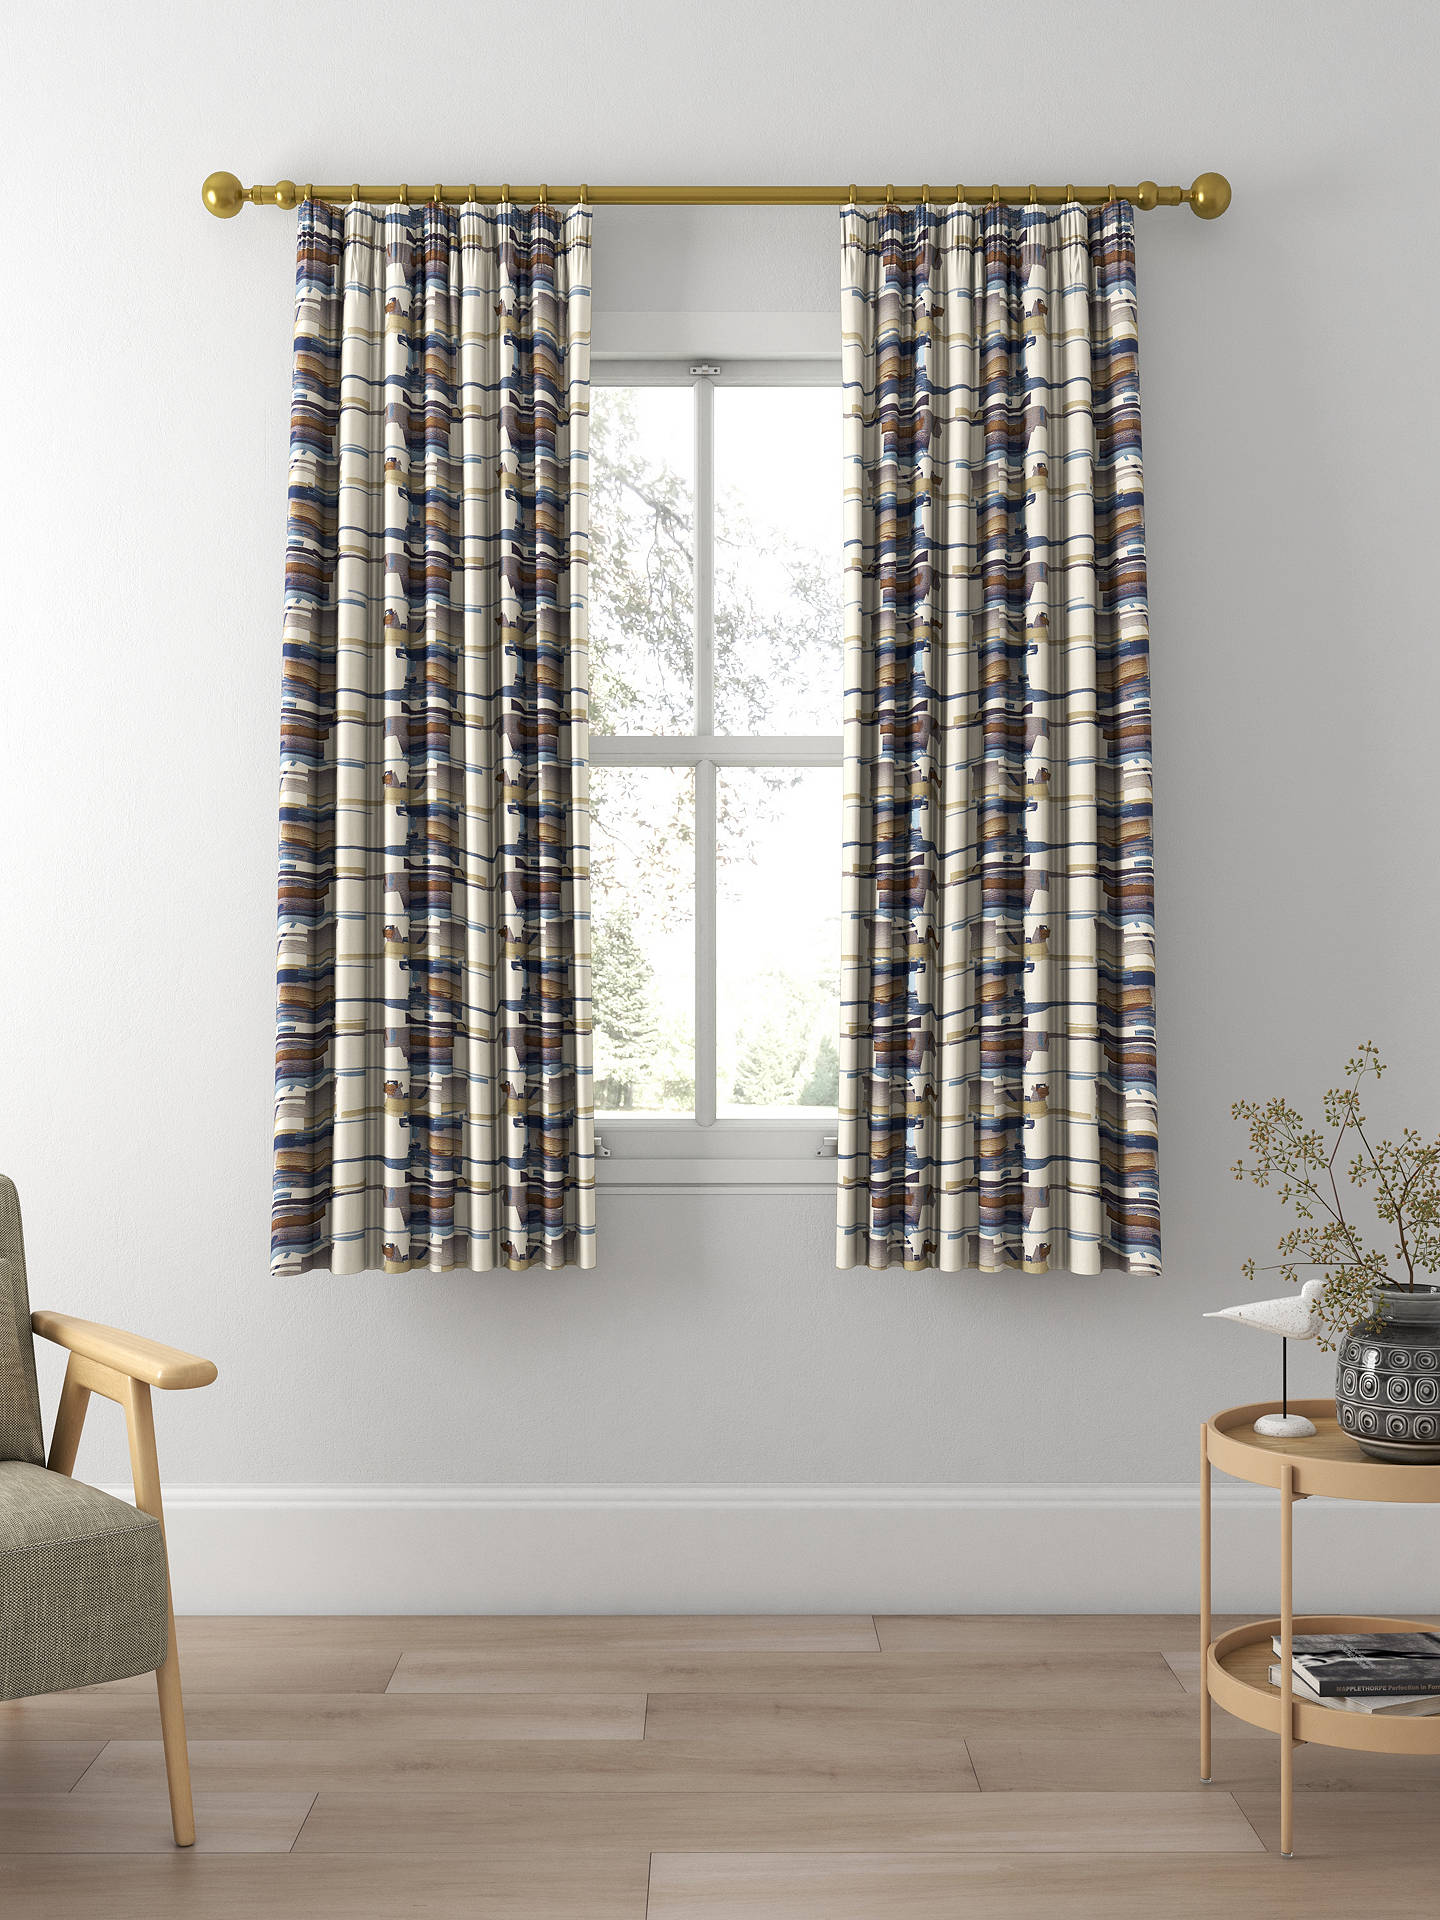 Harlequin Momentum 4 Made to Measure Curtains, Old Navy/Denim/Tan